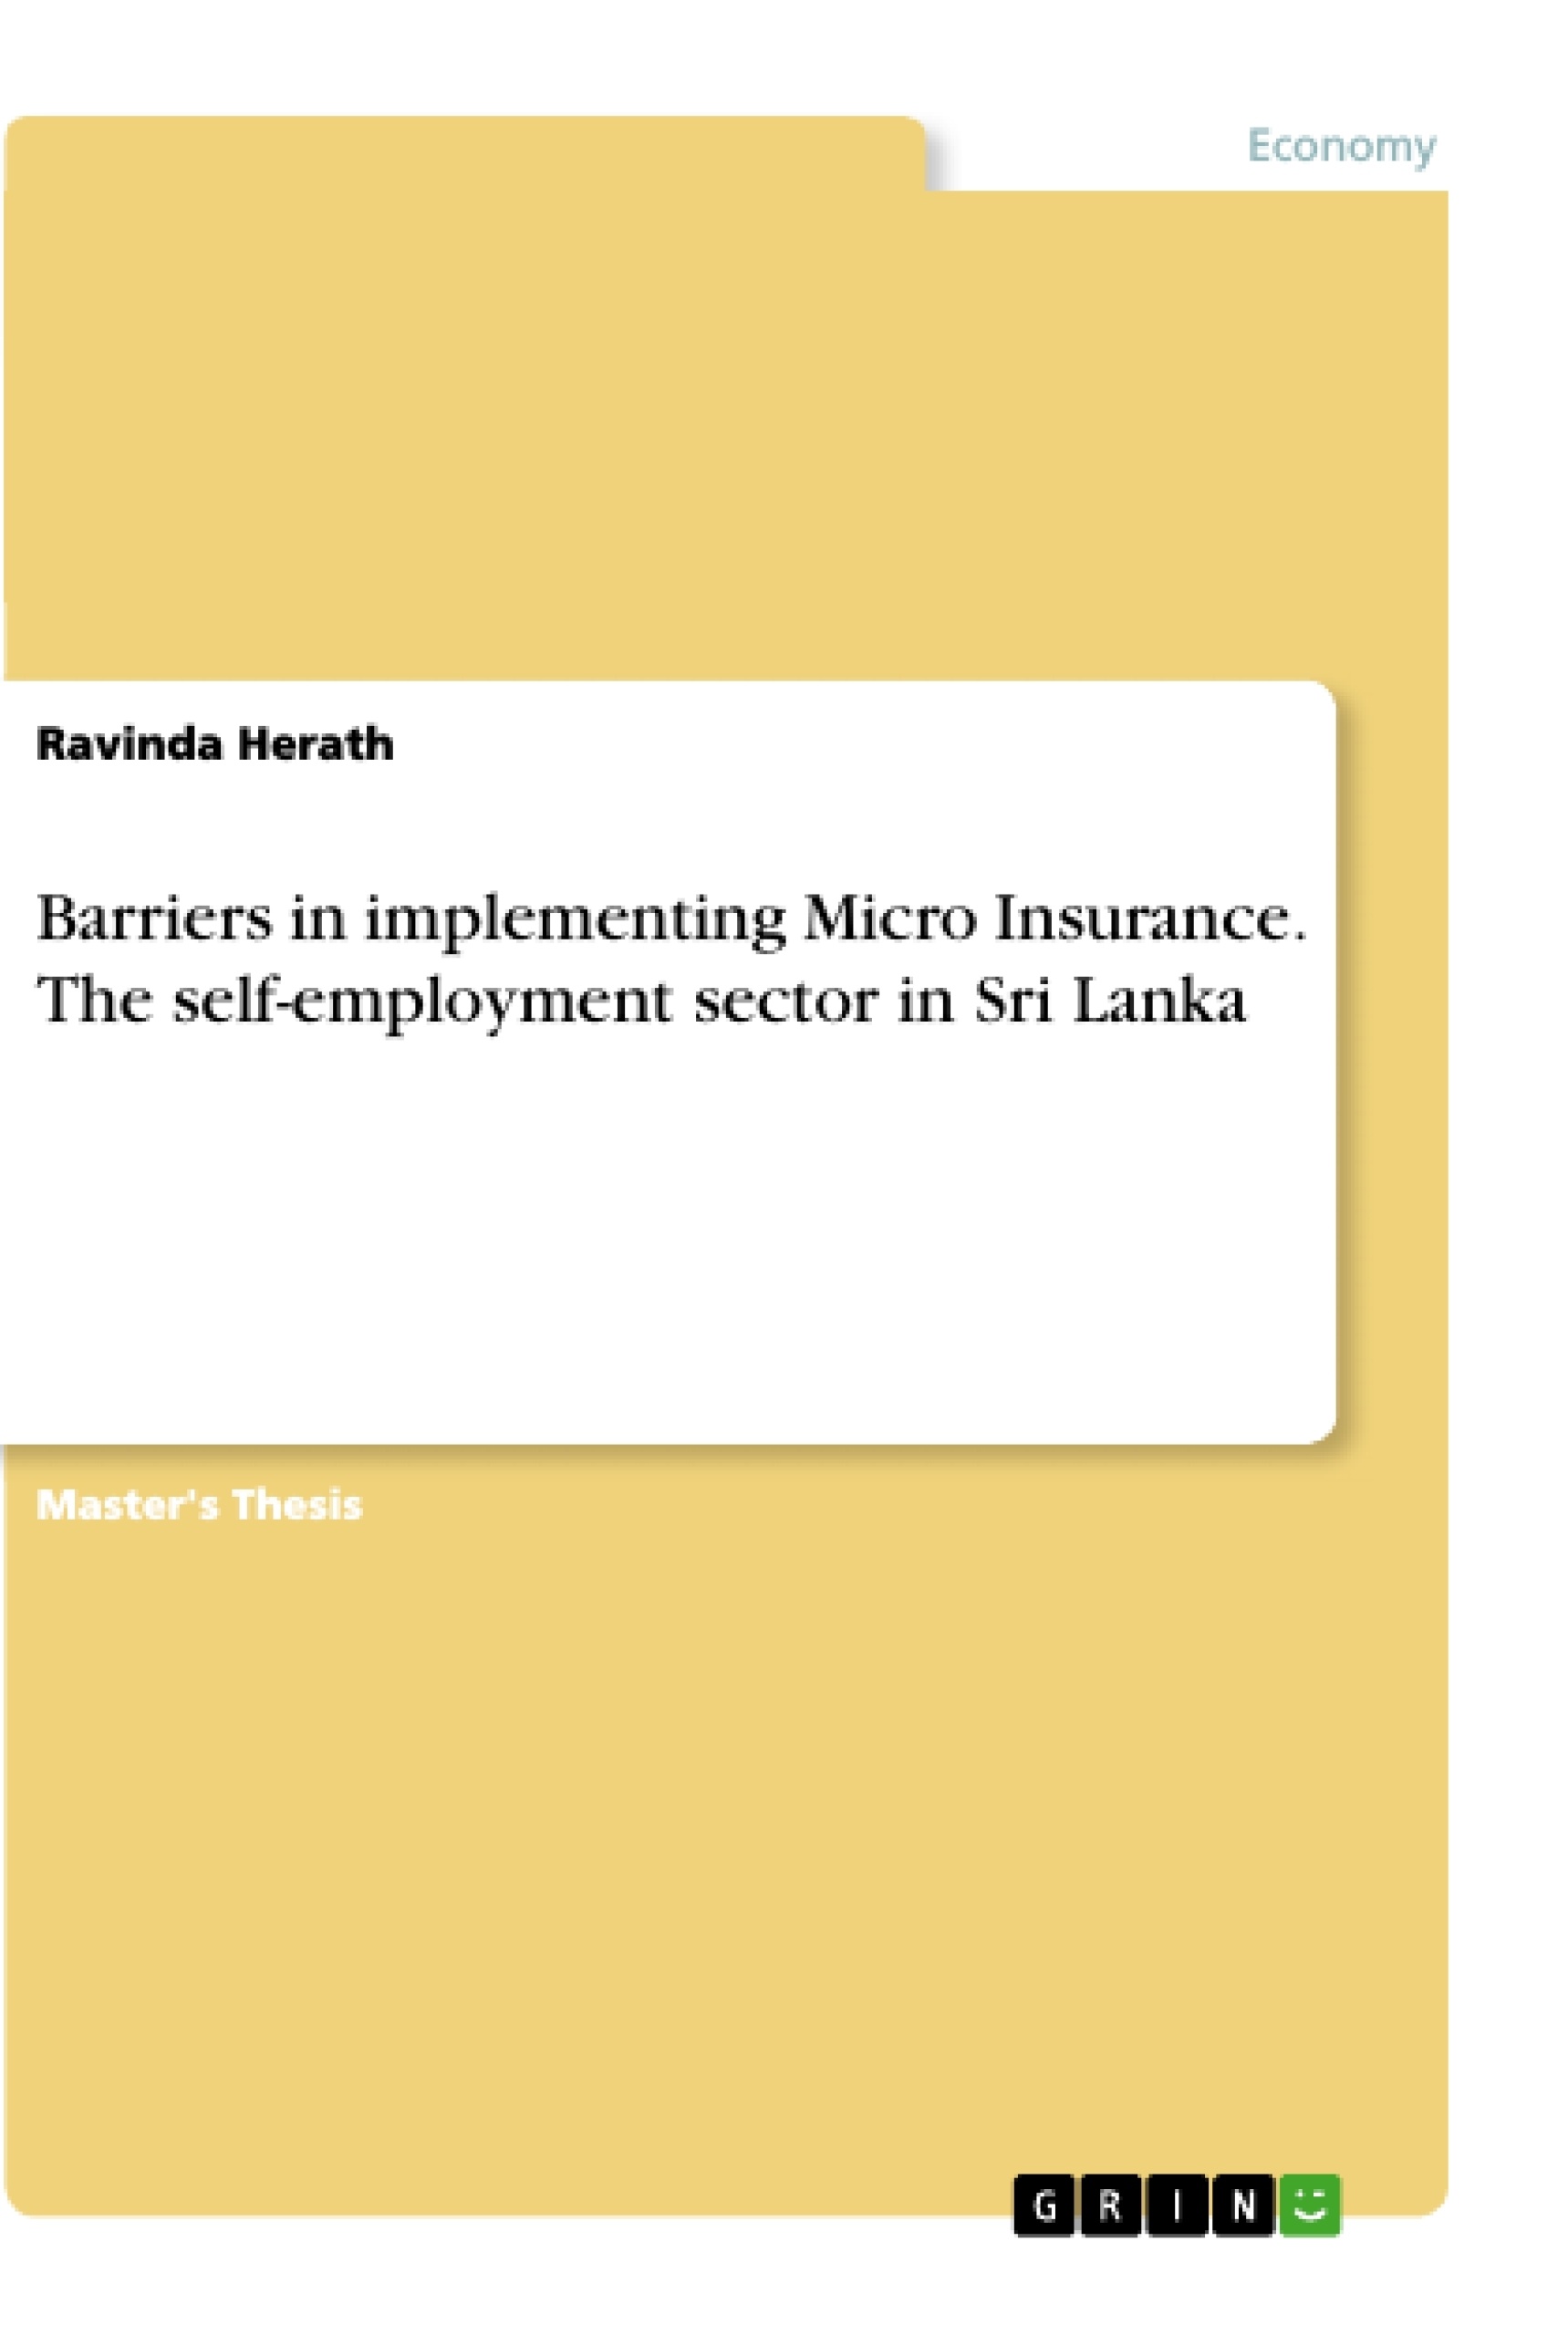 Titel: Barriers in implementing Micro Insurance. The self-employment sector in Sri Lanka